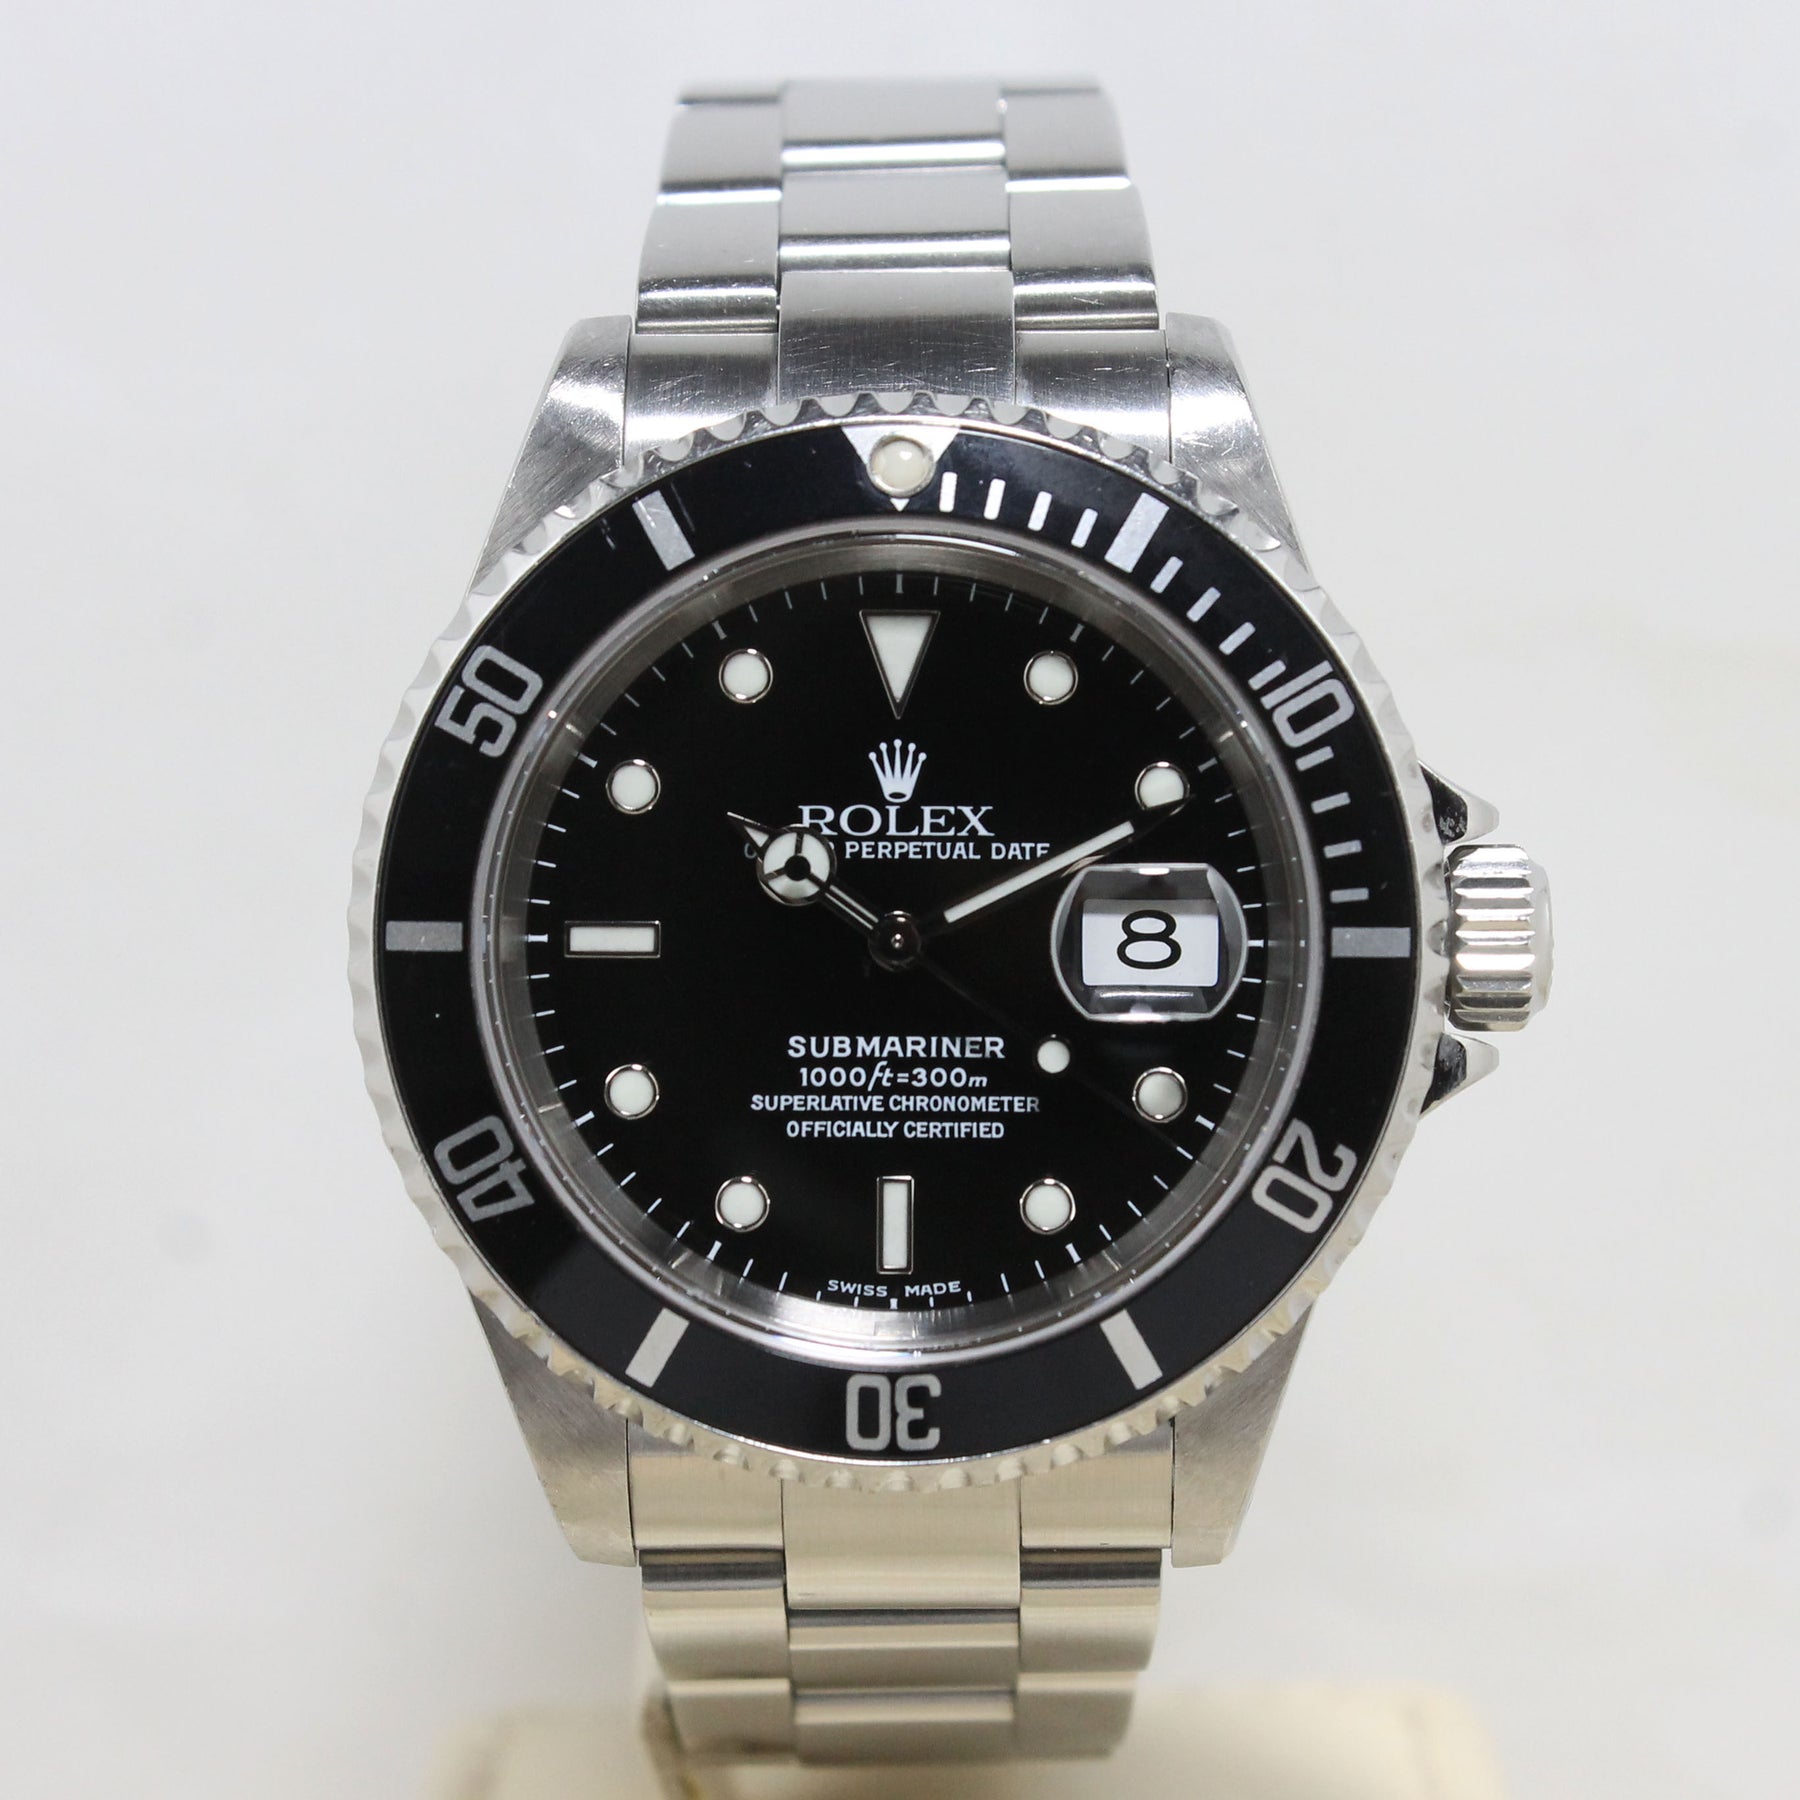 2001 Rolex Submariner Ref. 16610 (with Box & Papers)